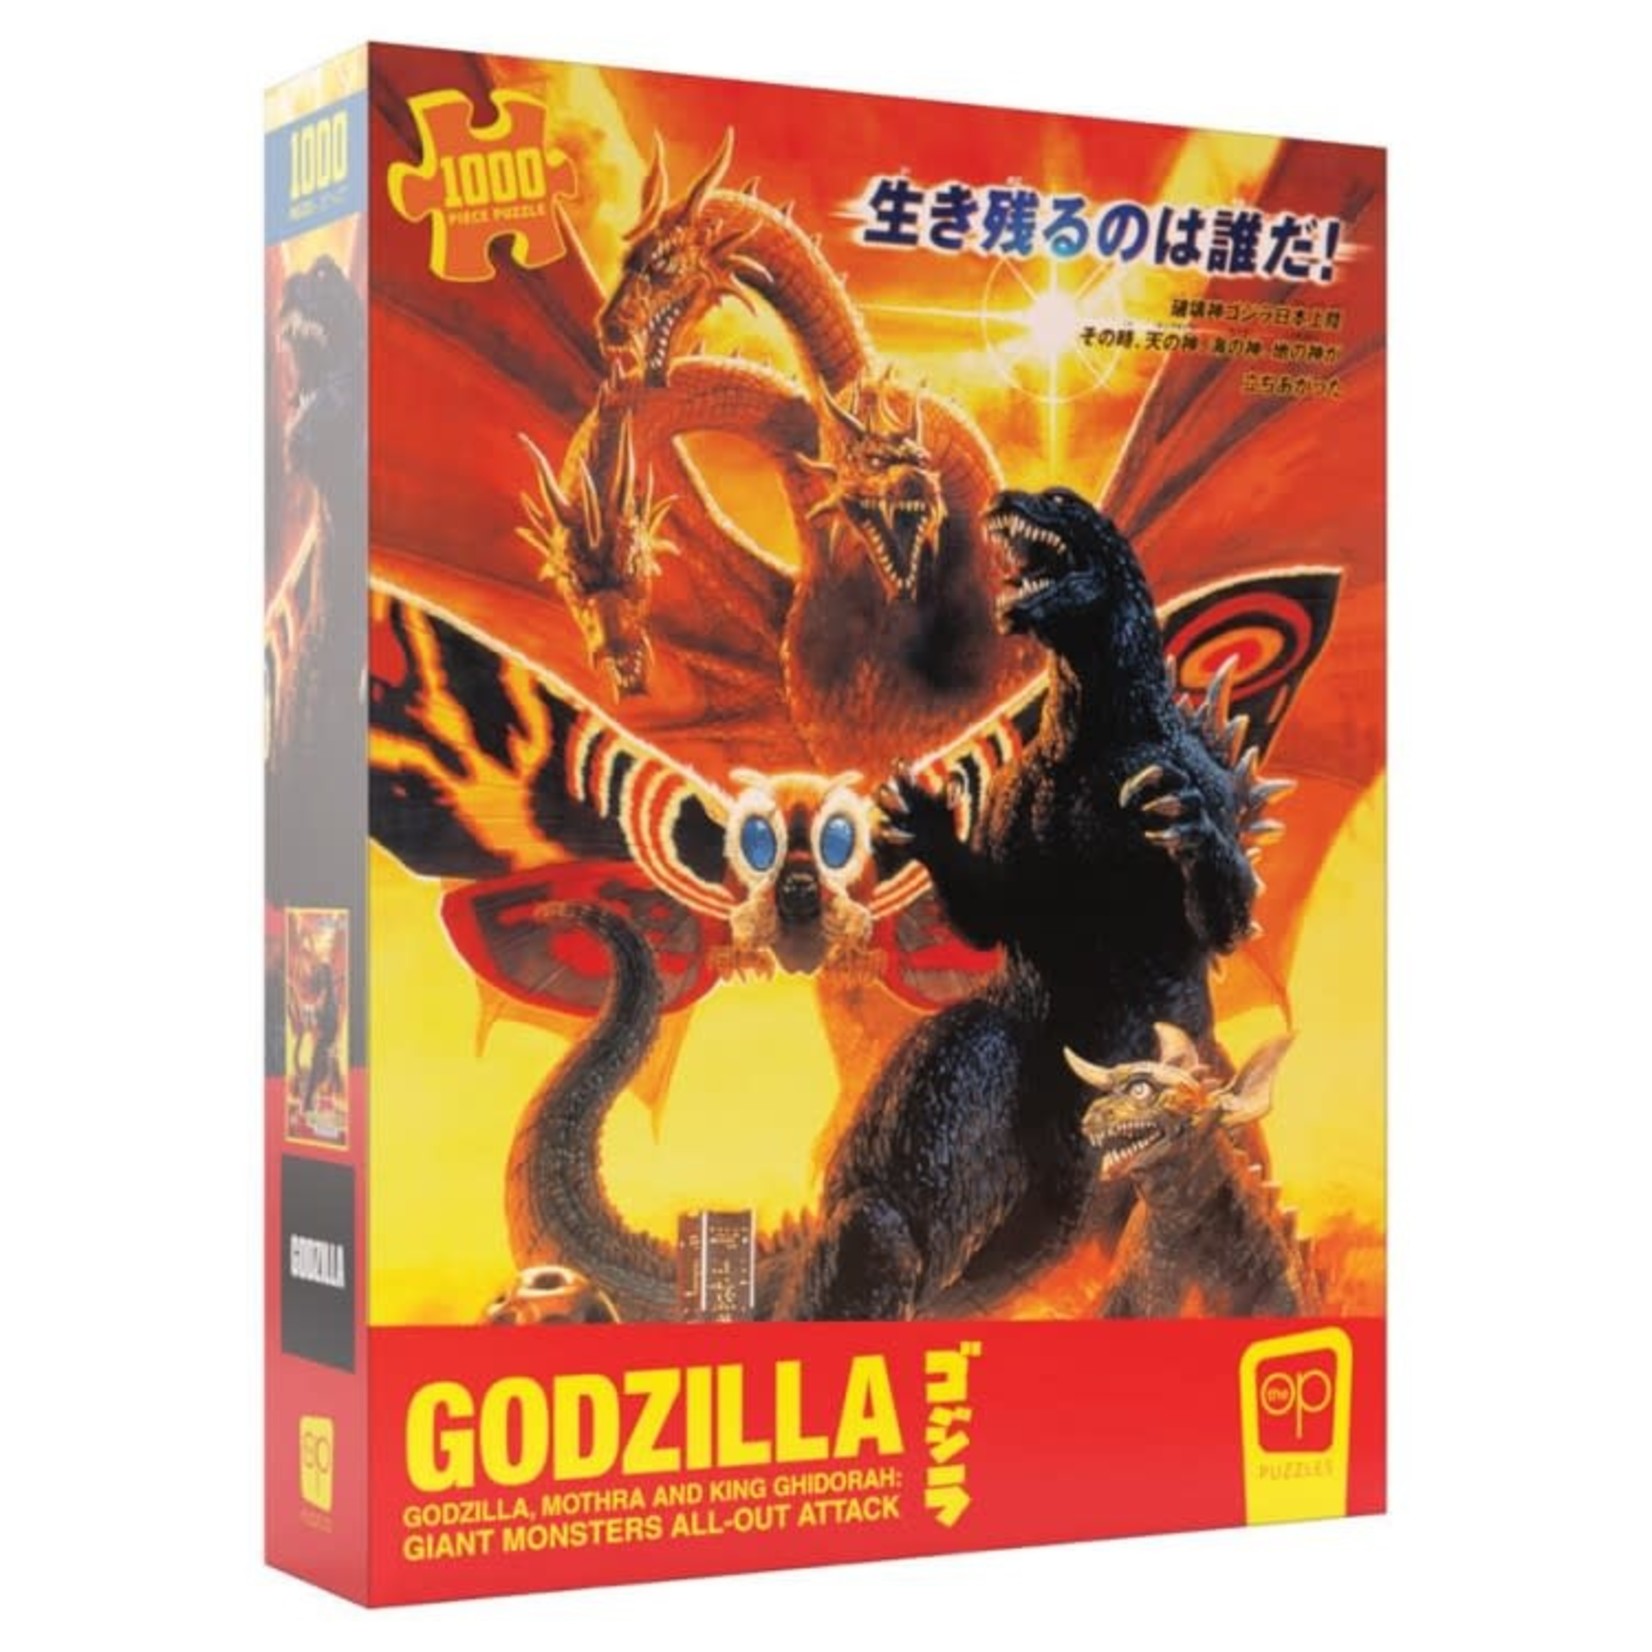 USAopoly 1000 pc Puzzle Godzilla Mothra King Ghidorah Giant Monsters All Out Attack